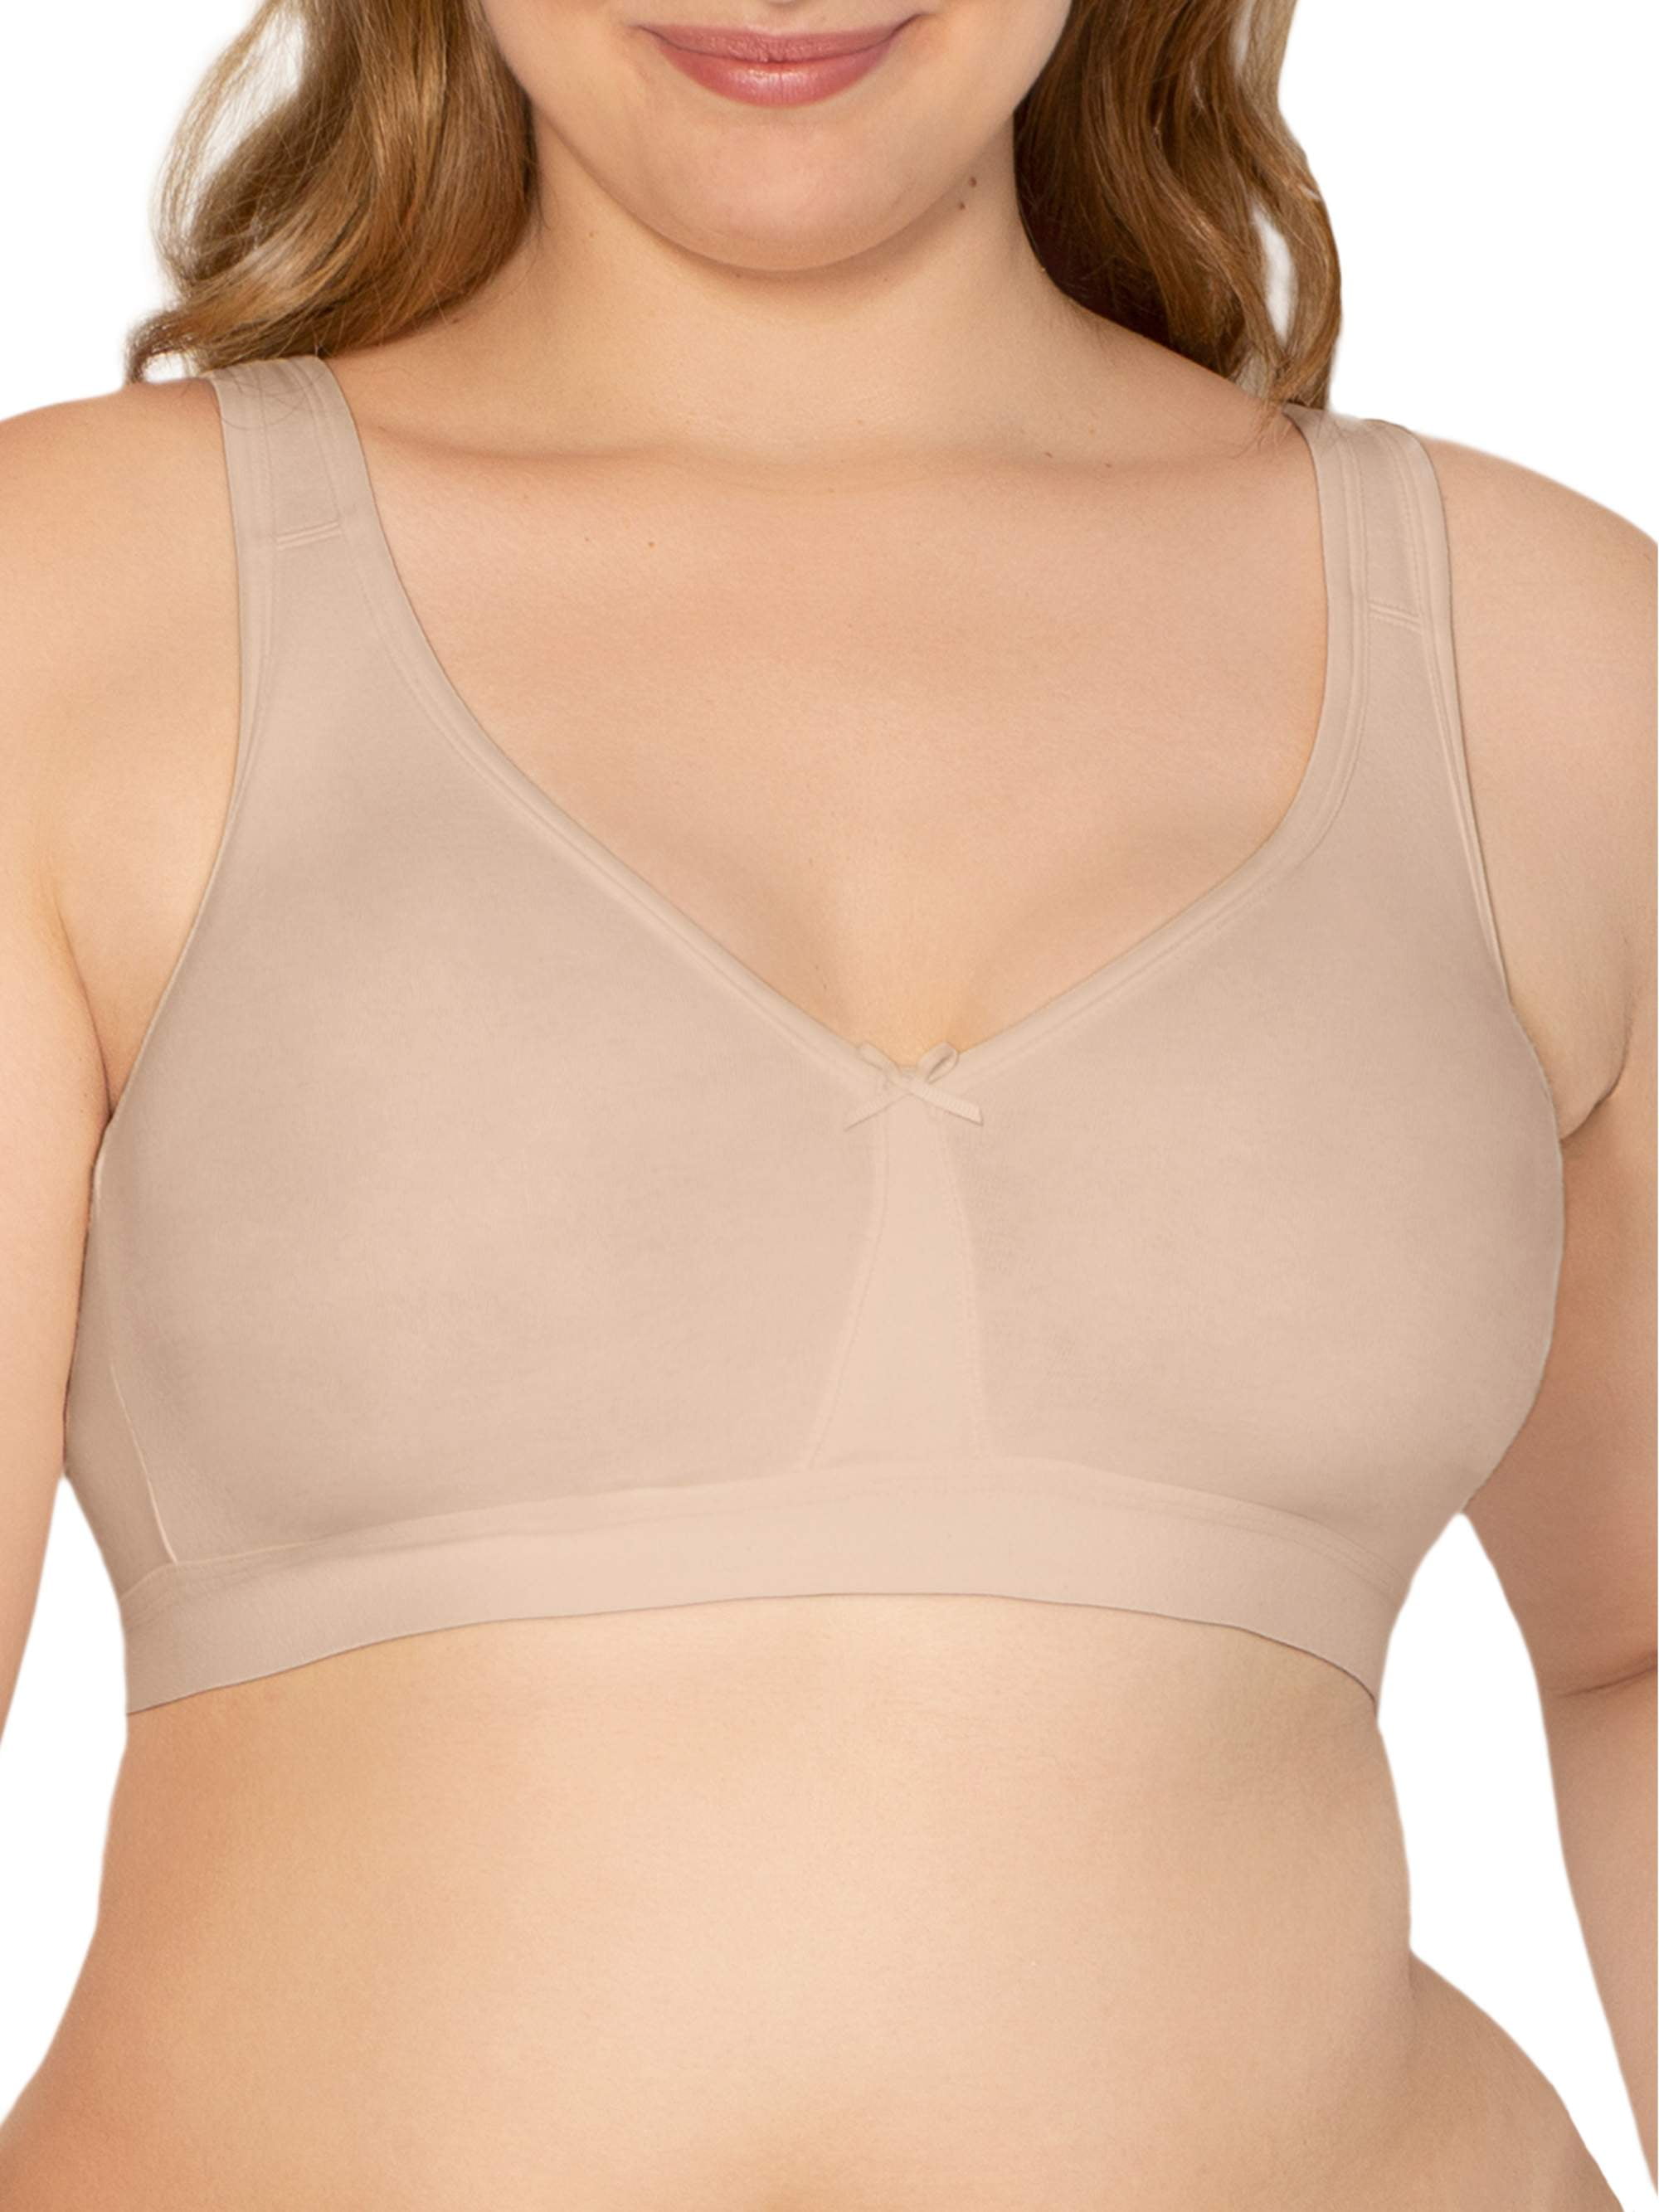 Buy FIMS - Fashion is my style Women Cotton Bra Non-Wired, Non